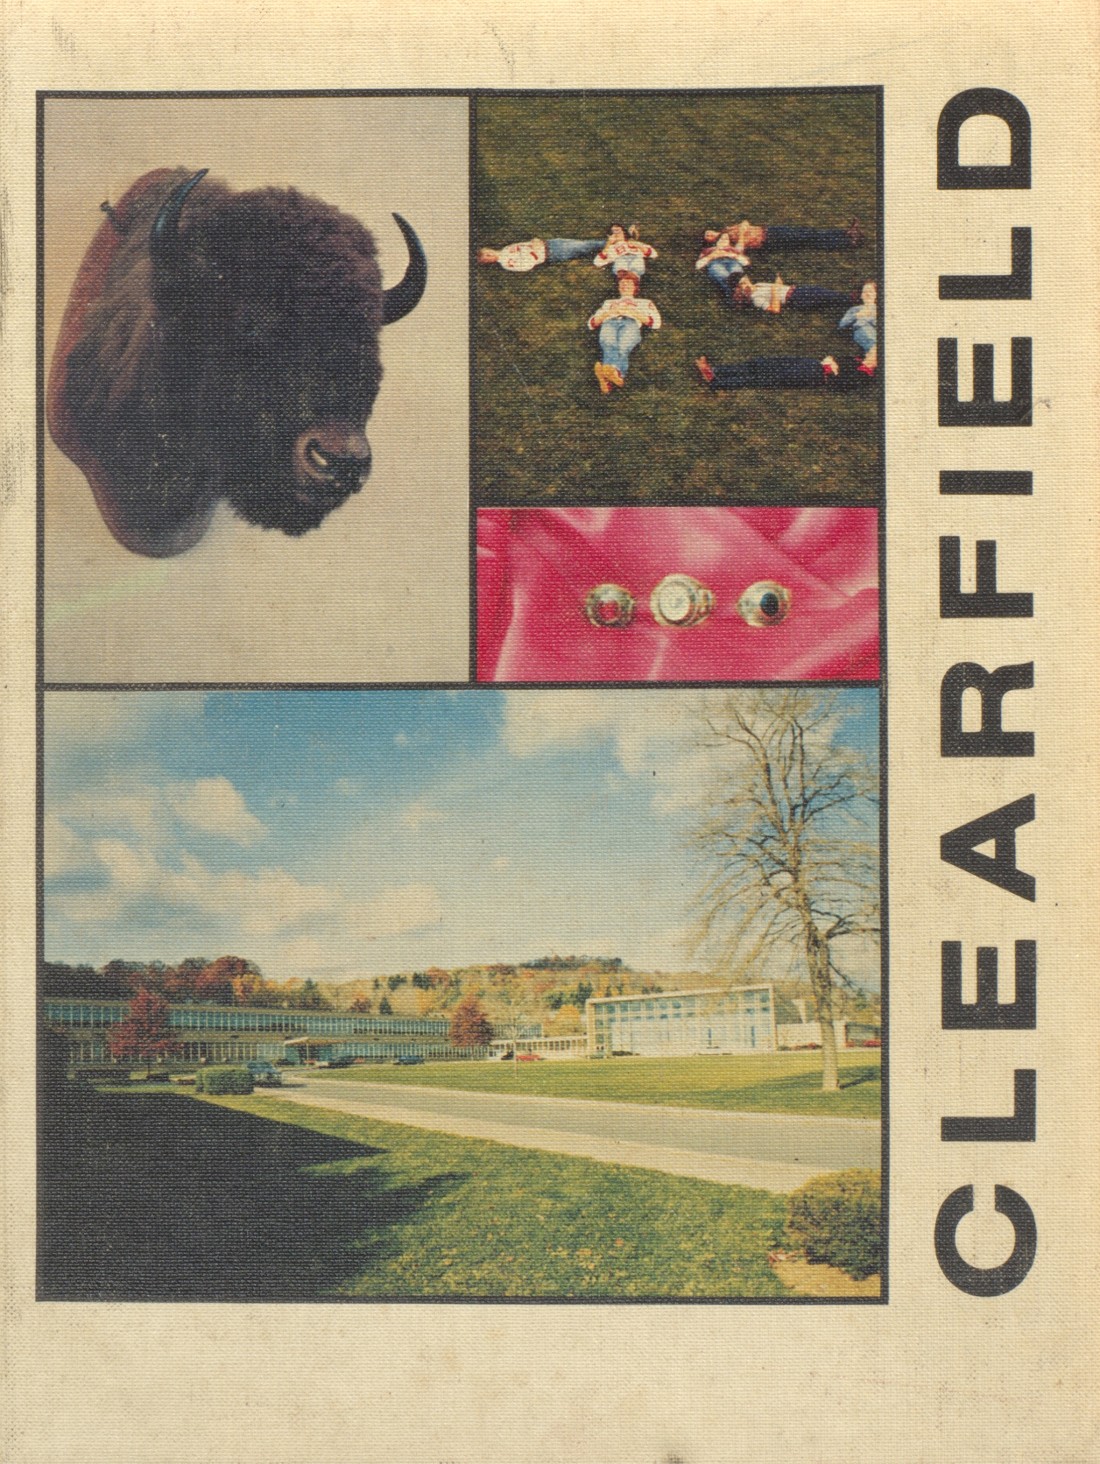 1975-yearbook-from-clearfield-area-high-school-from-clearfield